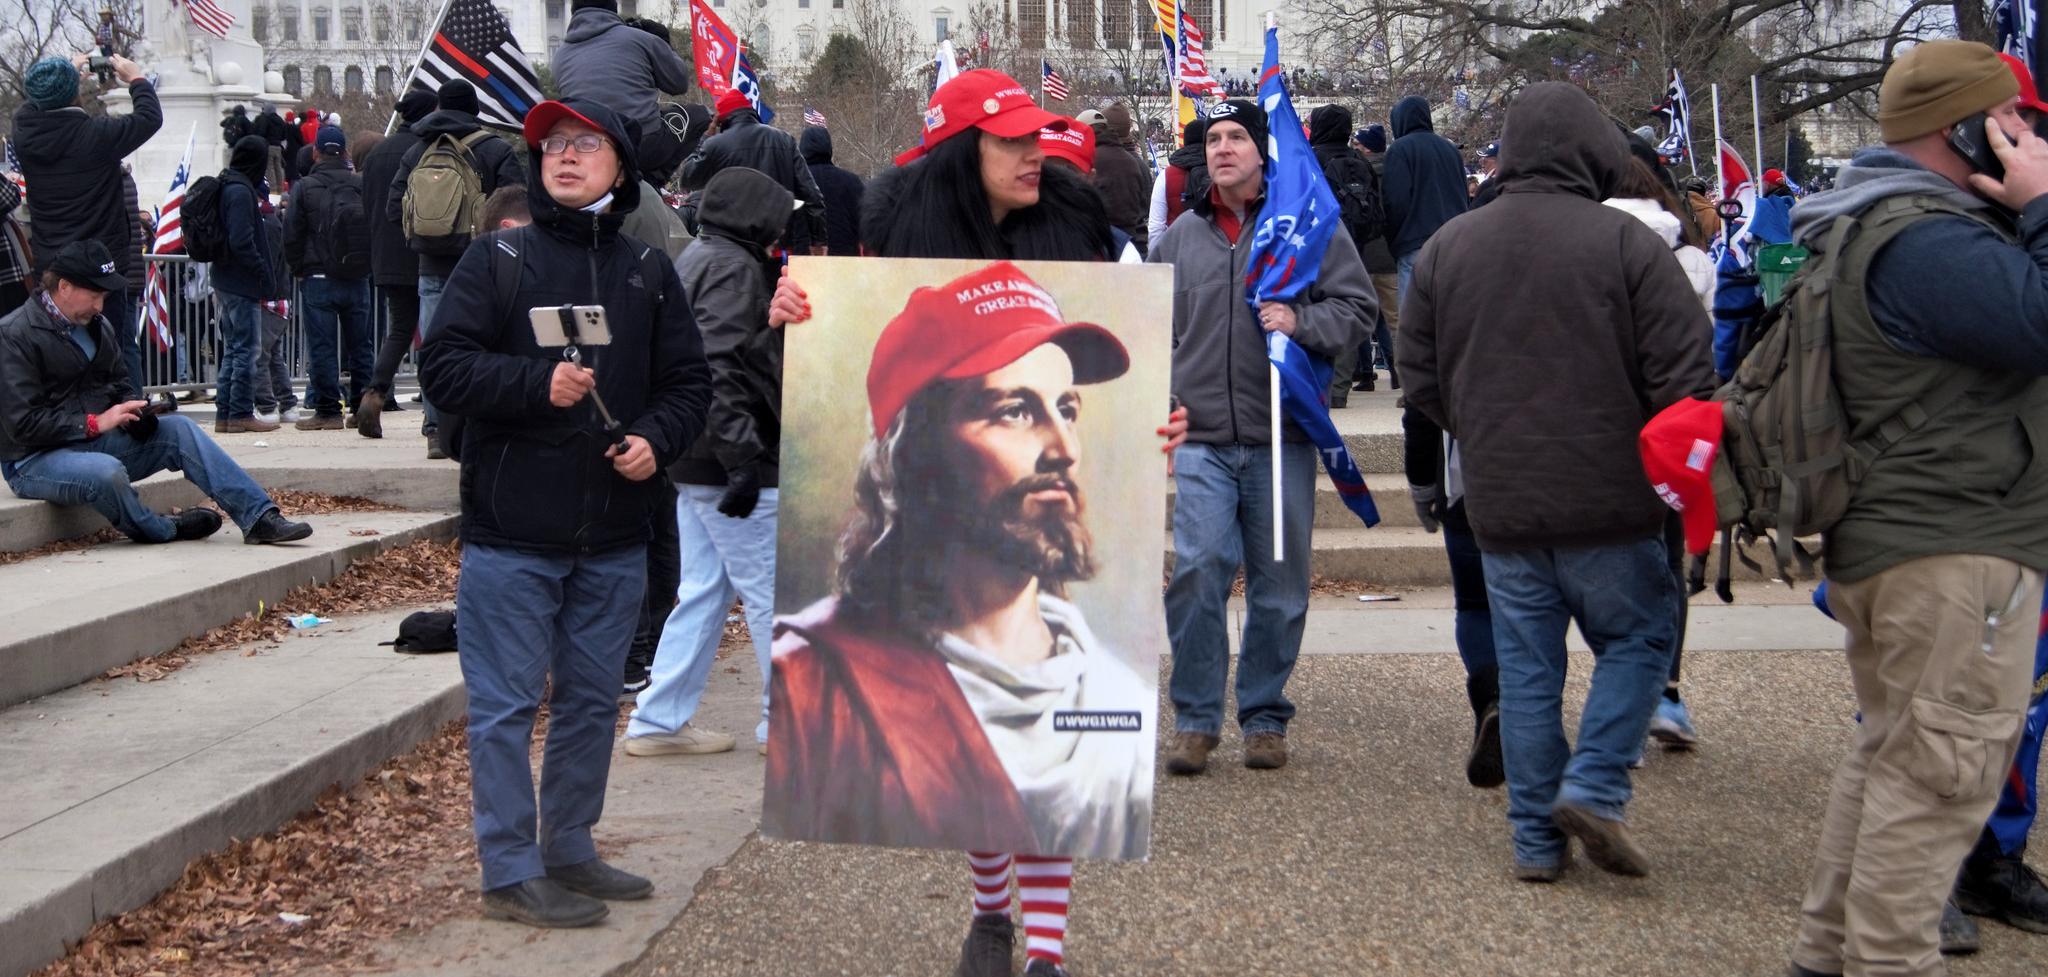 A woman wearing a red hat, holding a paining of Jesus wearing a Make America Great Again hat.